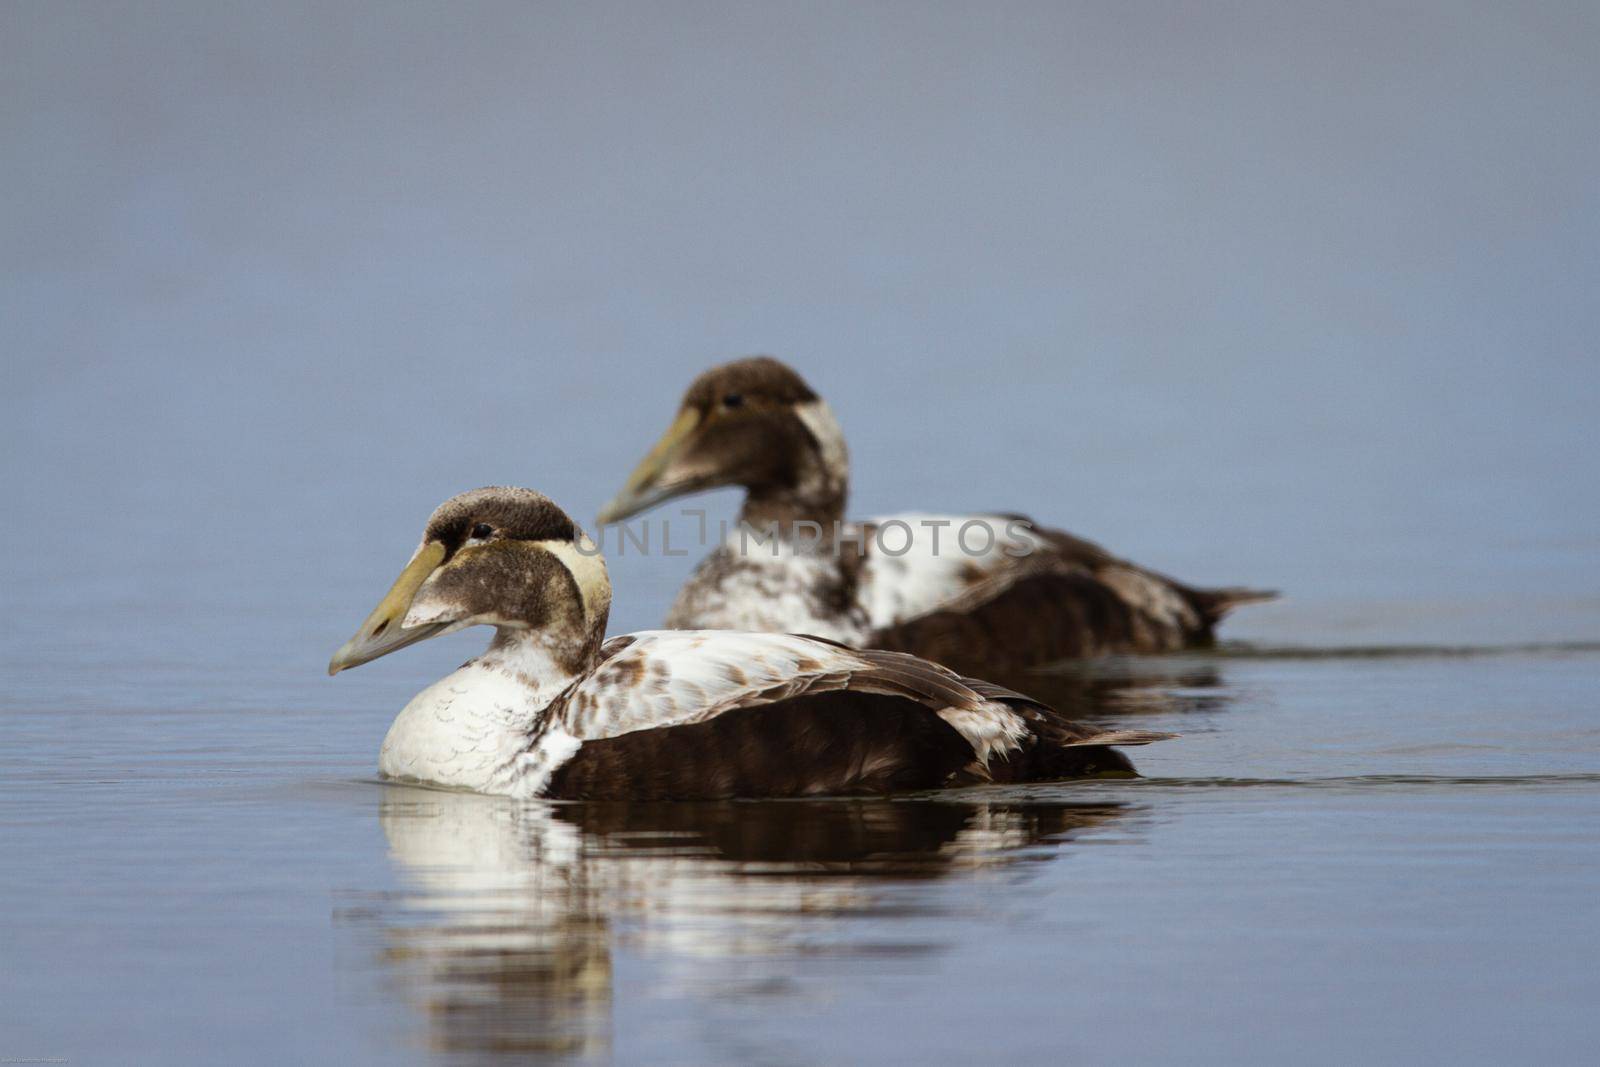 Two young male common eider ducks swimming a pond, near Arviat Nunavut Canada